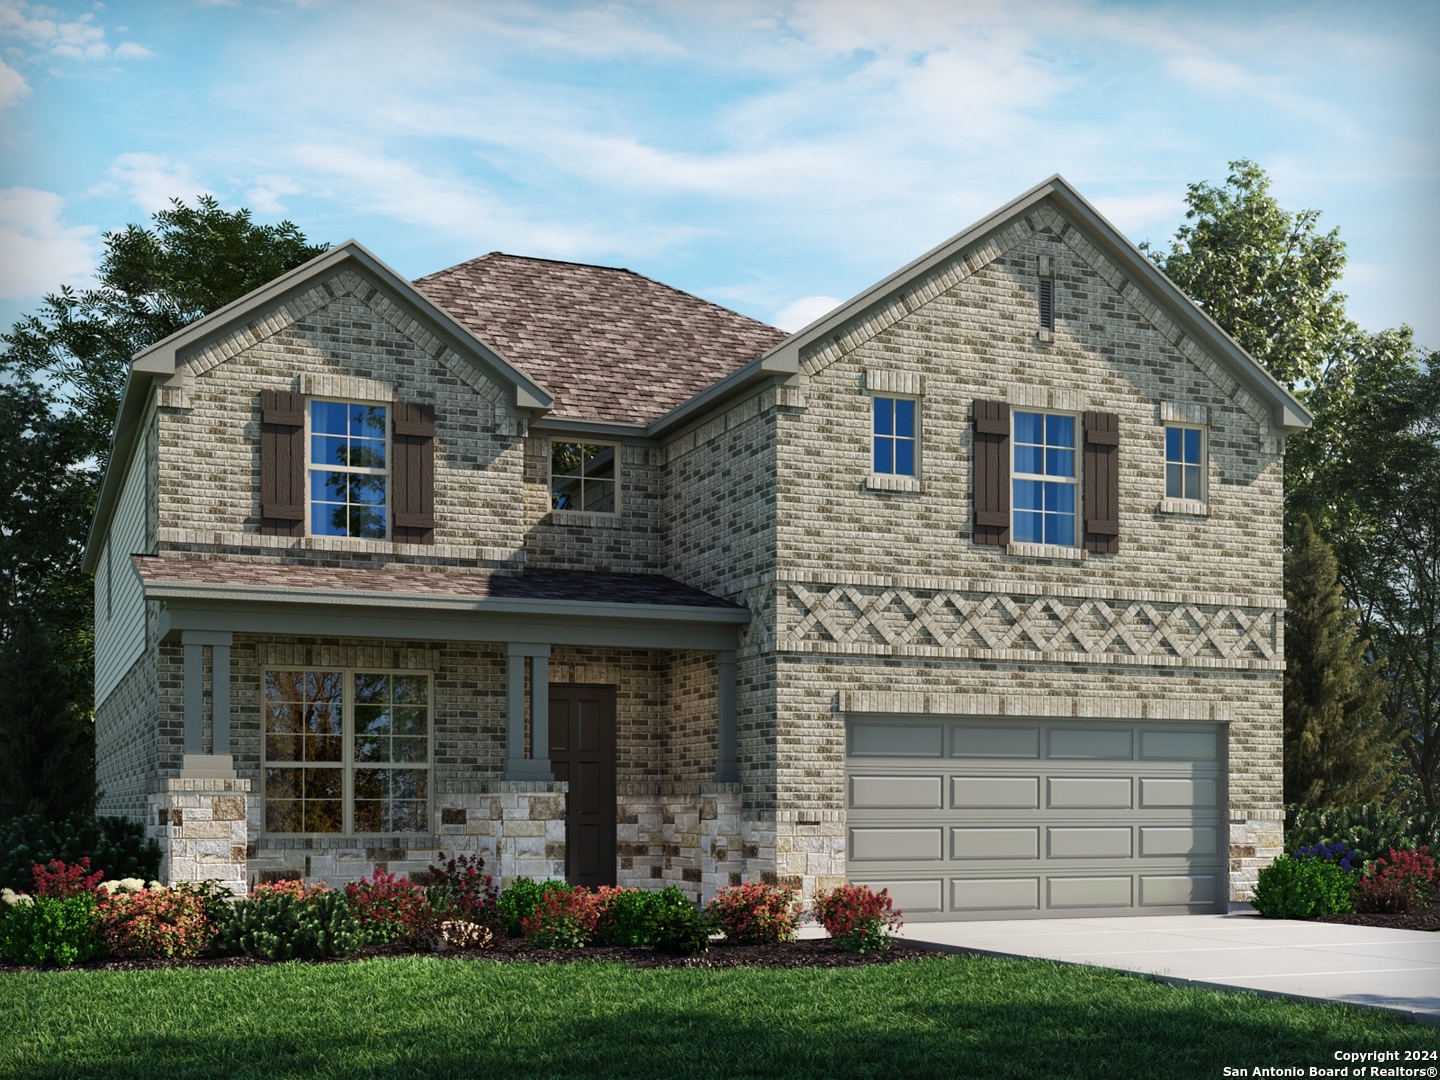 Photo of 10632 Yellowtail Blvd in Boerne, TX